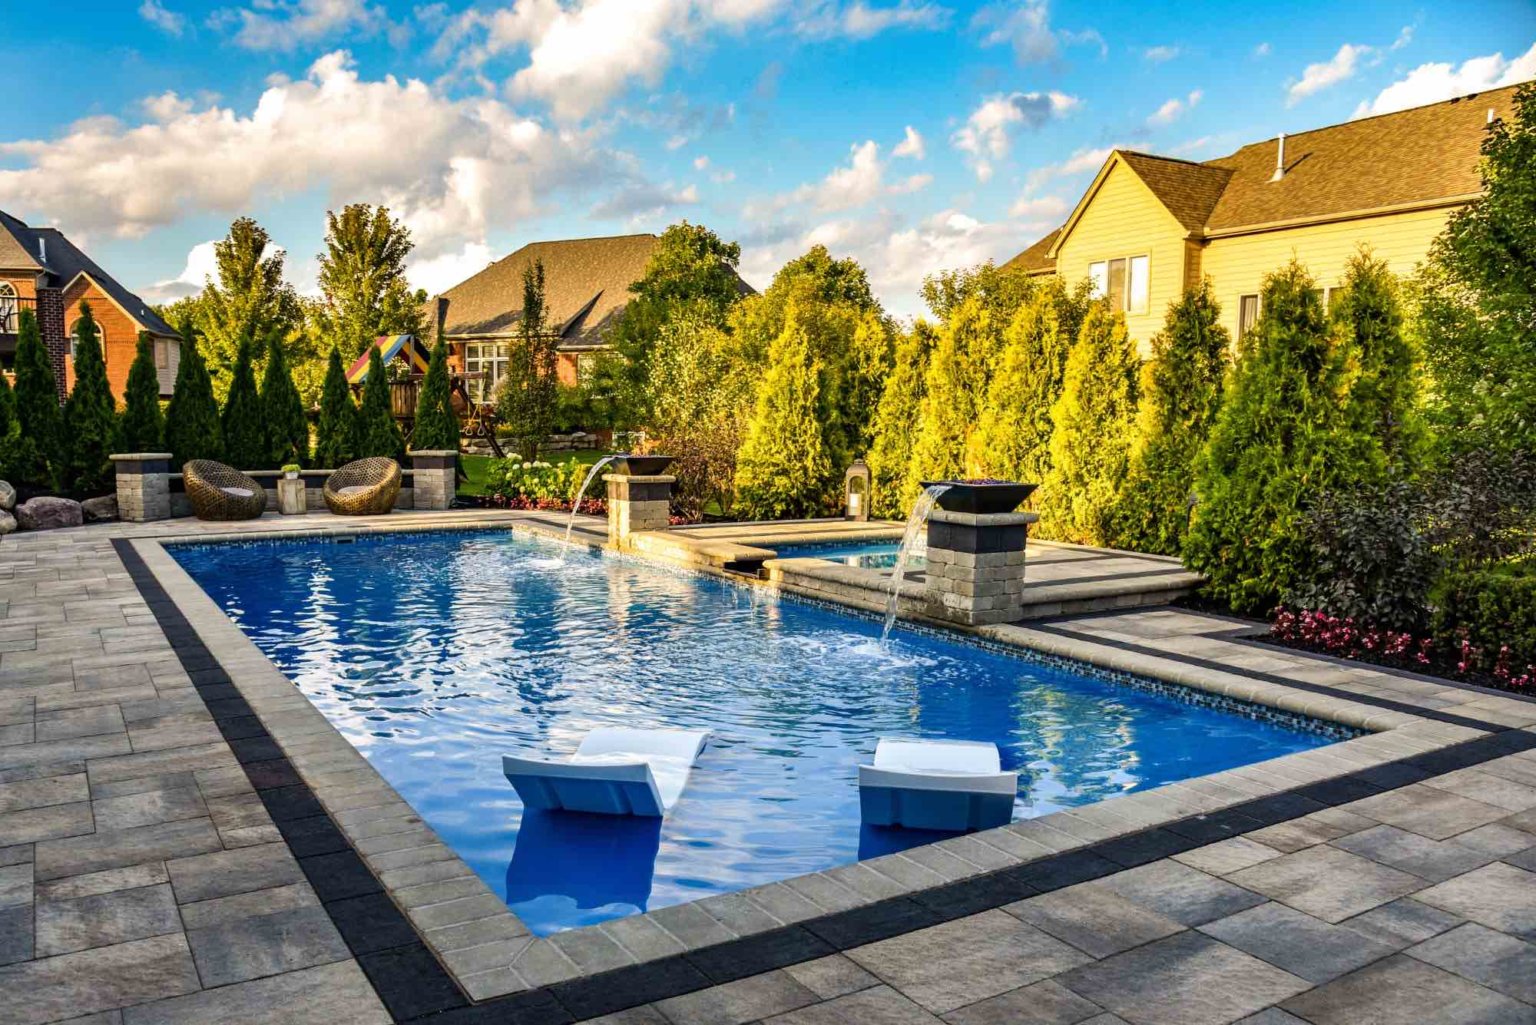 Arborvitae privacy trees  fiberglass pool designers in Shelby Twp, Mi landscape design project in Shelby Township cascade fiberglass swimming pool design with a raised spillover spa  pool and spa design Metro Detroit Metro Detroit pool and spa experts Custom pool design Metro Detroit Spa installation in Metro Detroit Metro Detroit outdoor spa design Residential pool design Metro Detroit Metro Detroit luxury pool and spa